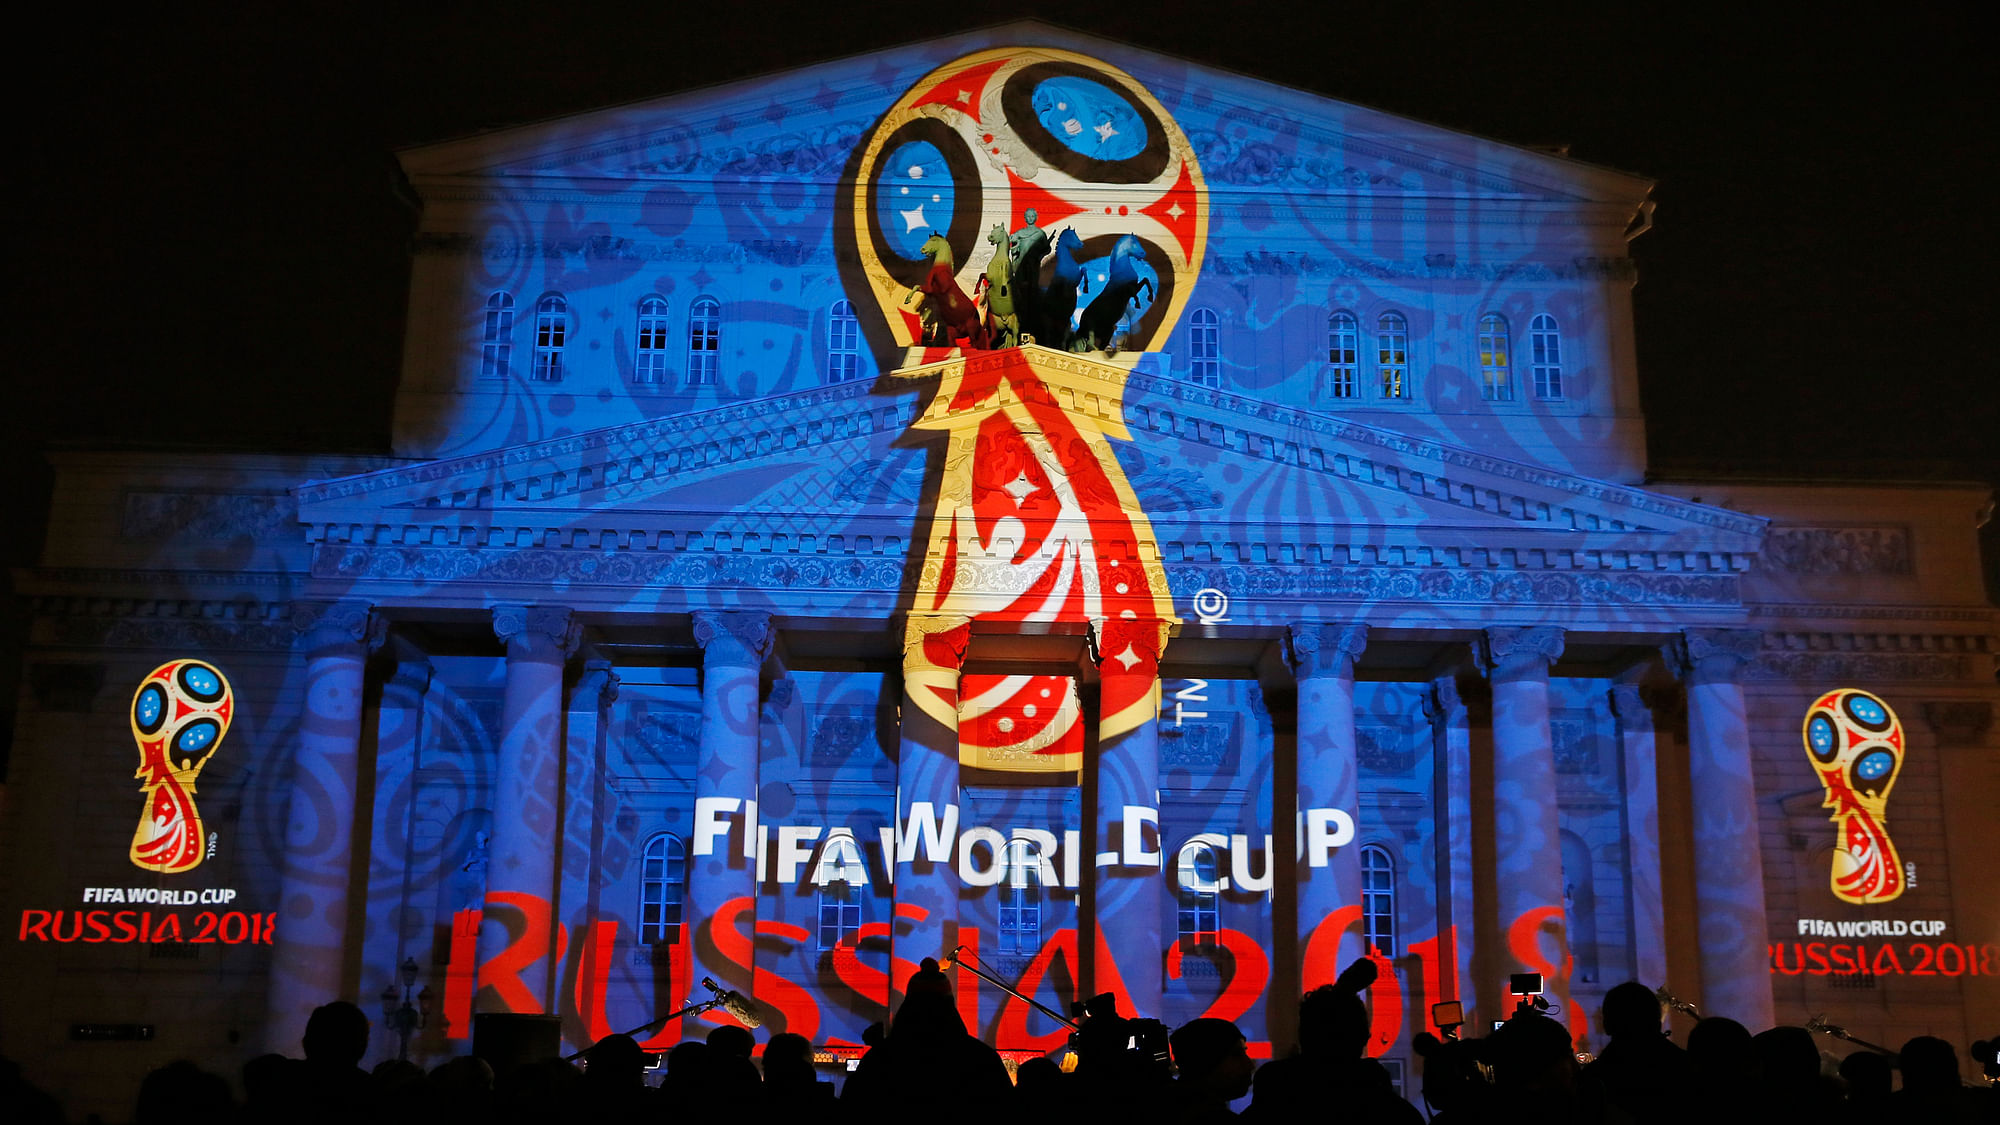  A light installation showing the official logotype of the 2018 FIFA World Cup during its unveiling ceremony at the Bolshoi Theater building in Moscow. (Photo: Reuters)